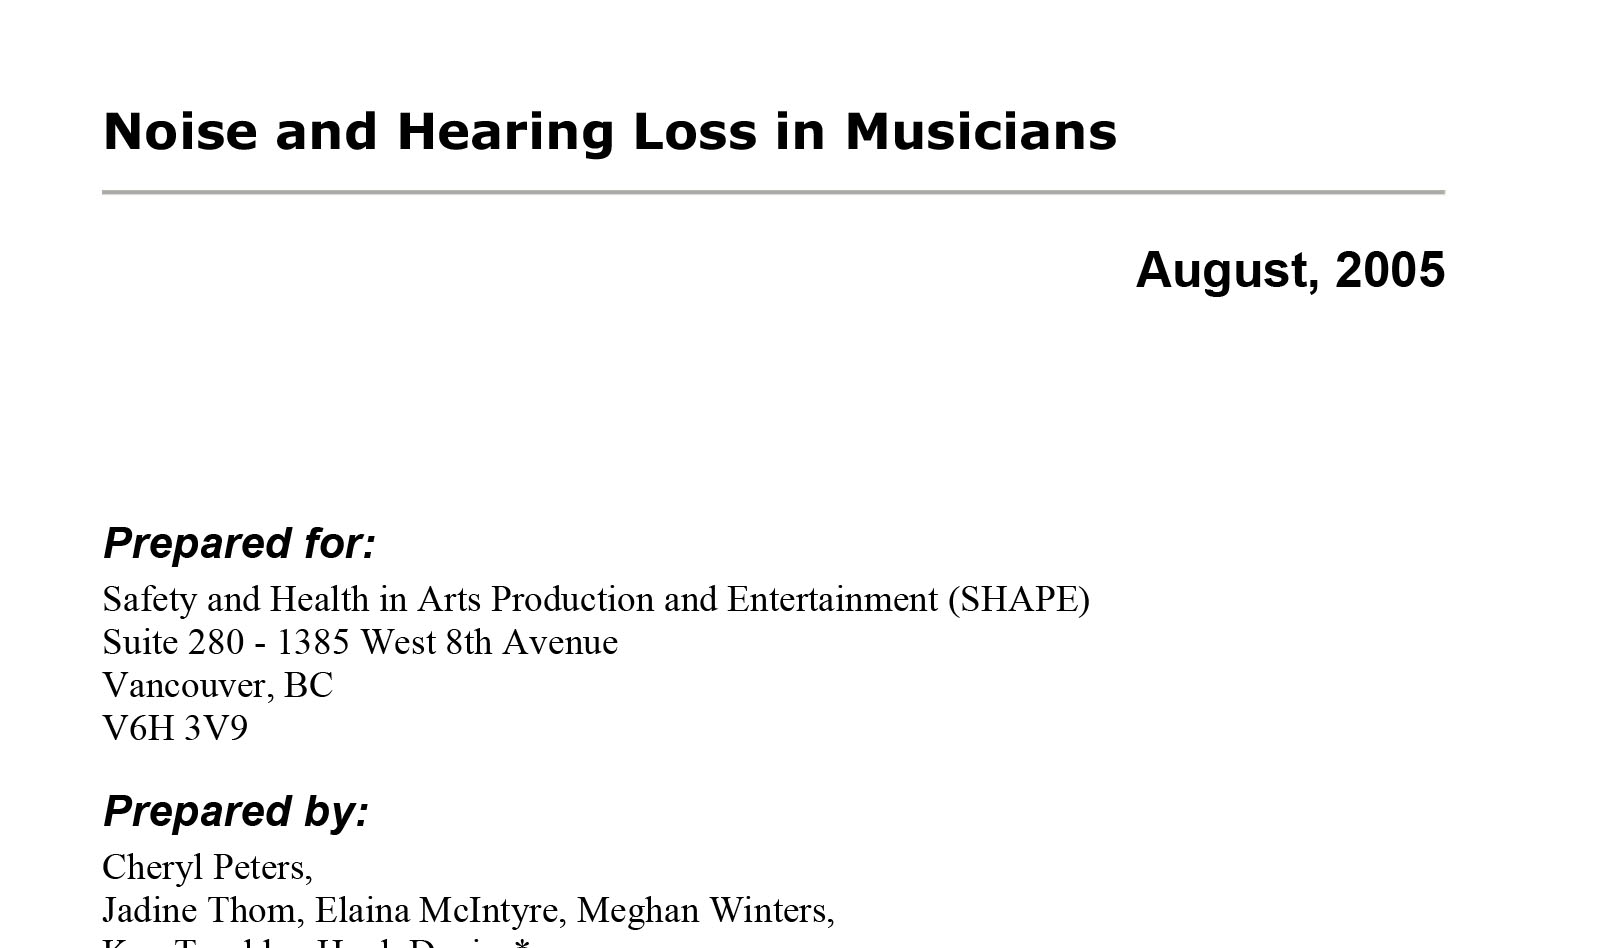 Noise and Hearing Loss in Musicians Report